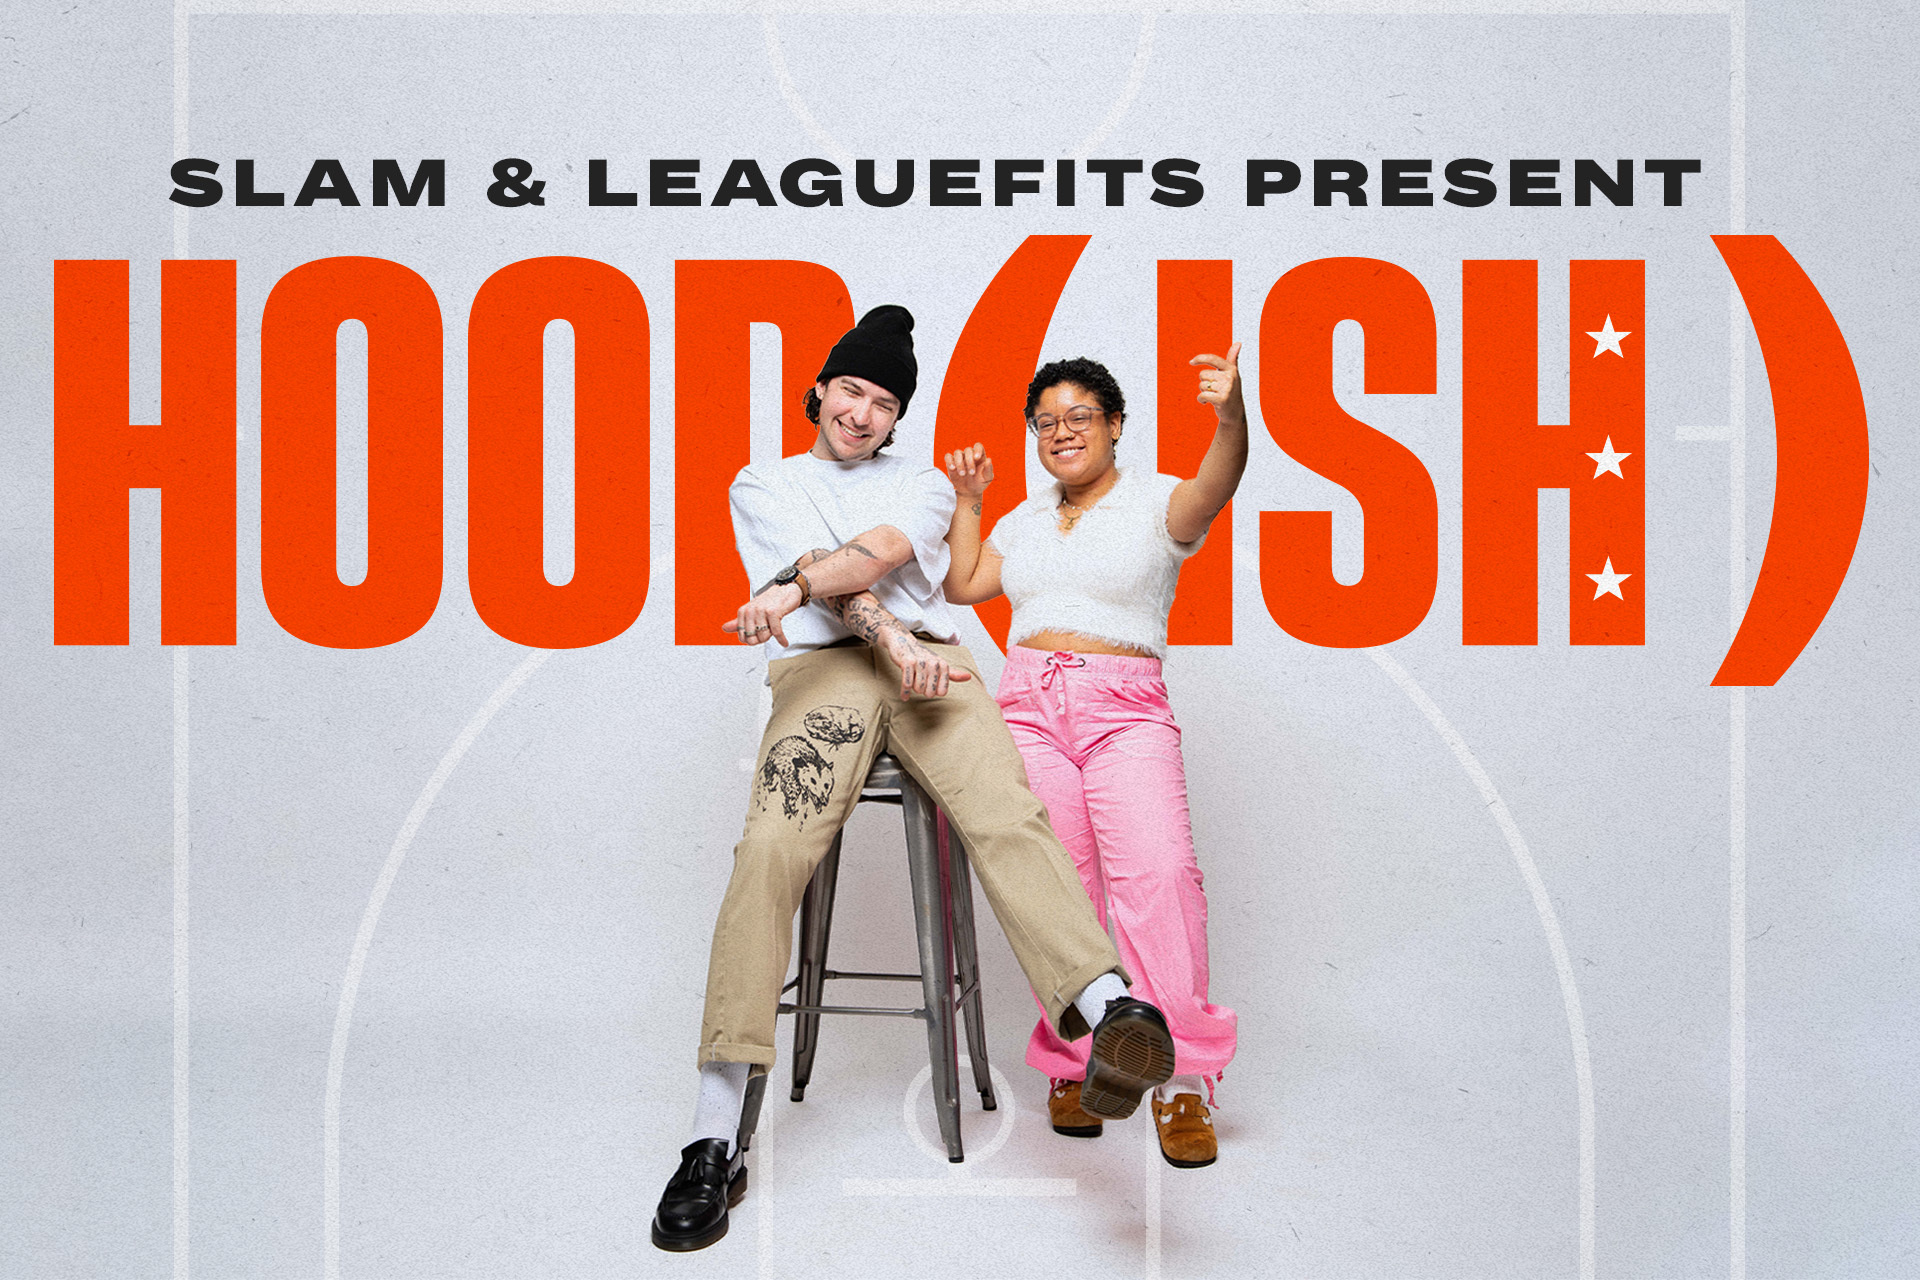 hoop(ish) is the Basketball Culture Podcast You Should Be Listening to Right Now